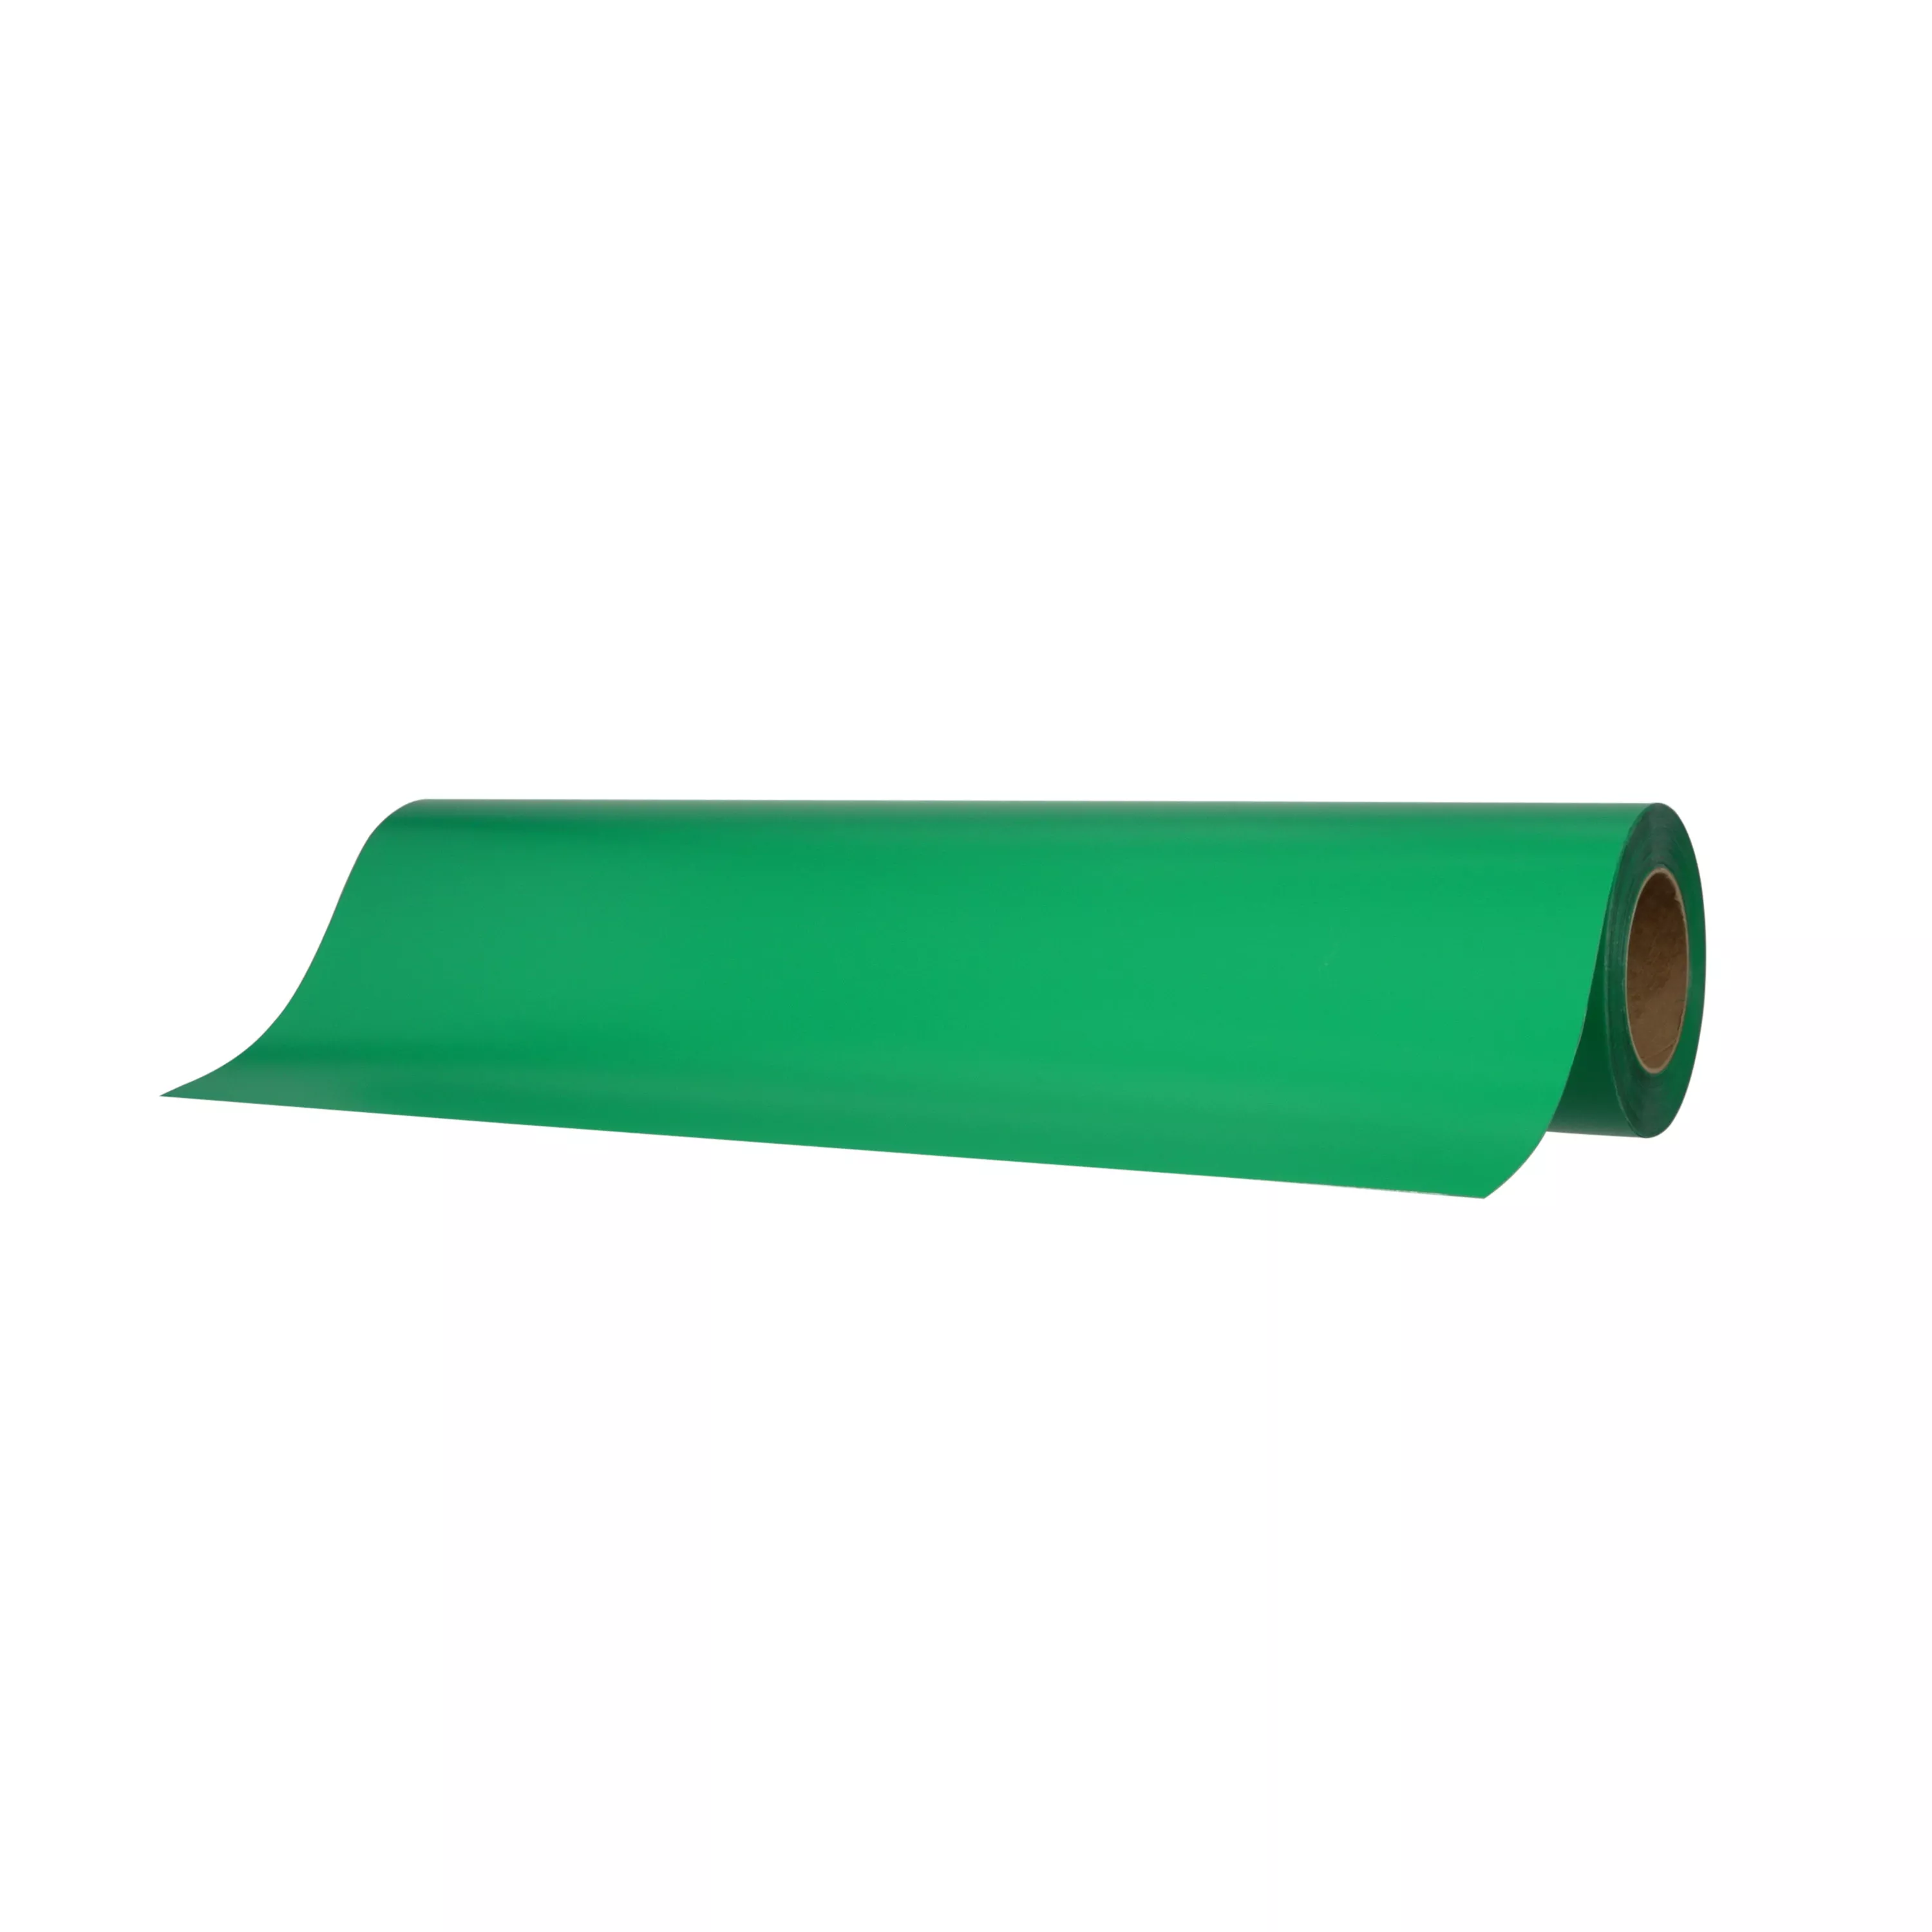 3M™ Scotchcal™ Translucent Graphic Film 3630-276, Kentucky Blue Grass,
48 in x 50 yd, 1 Roll/Case